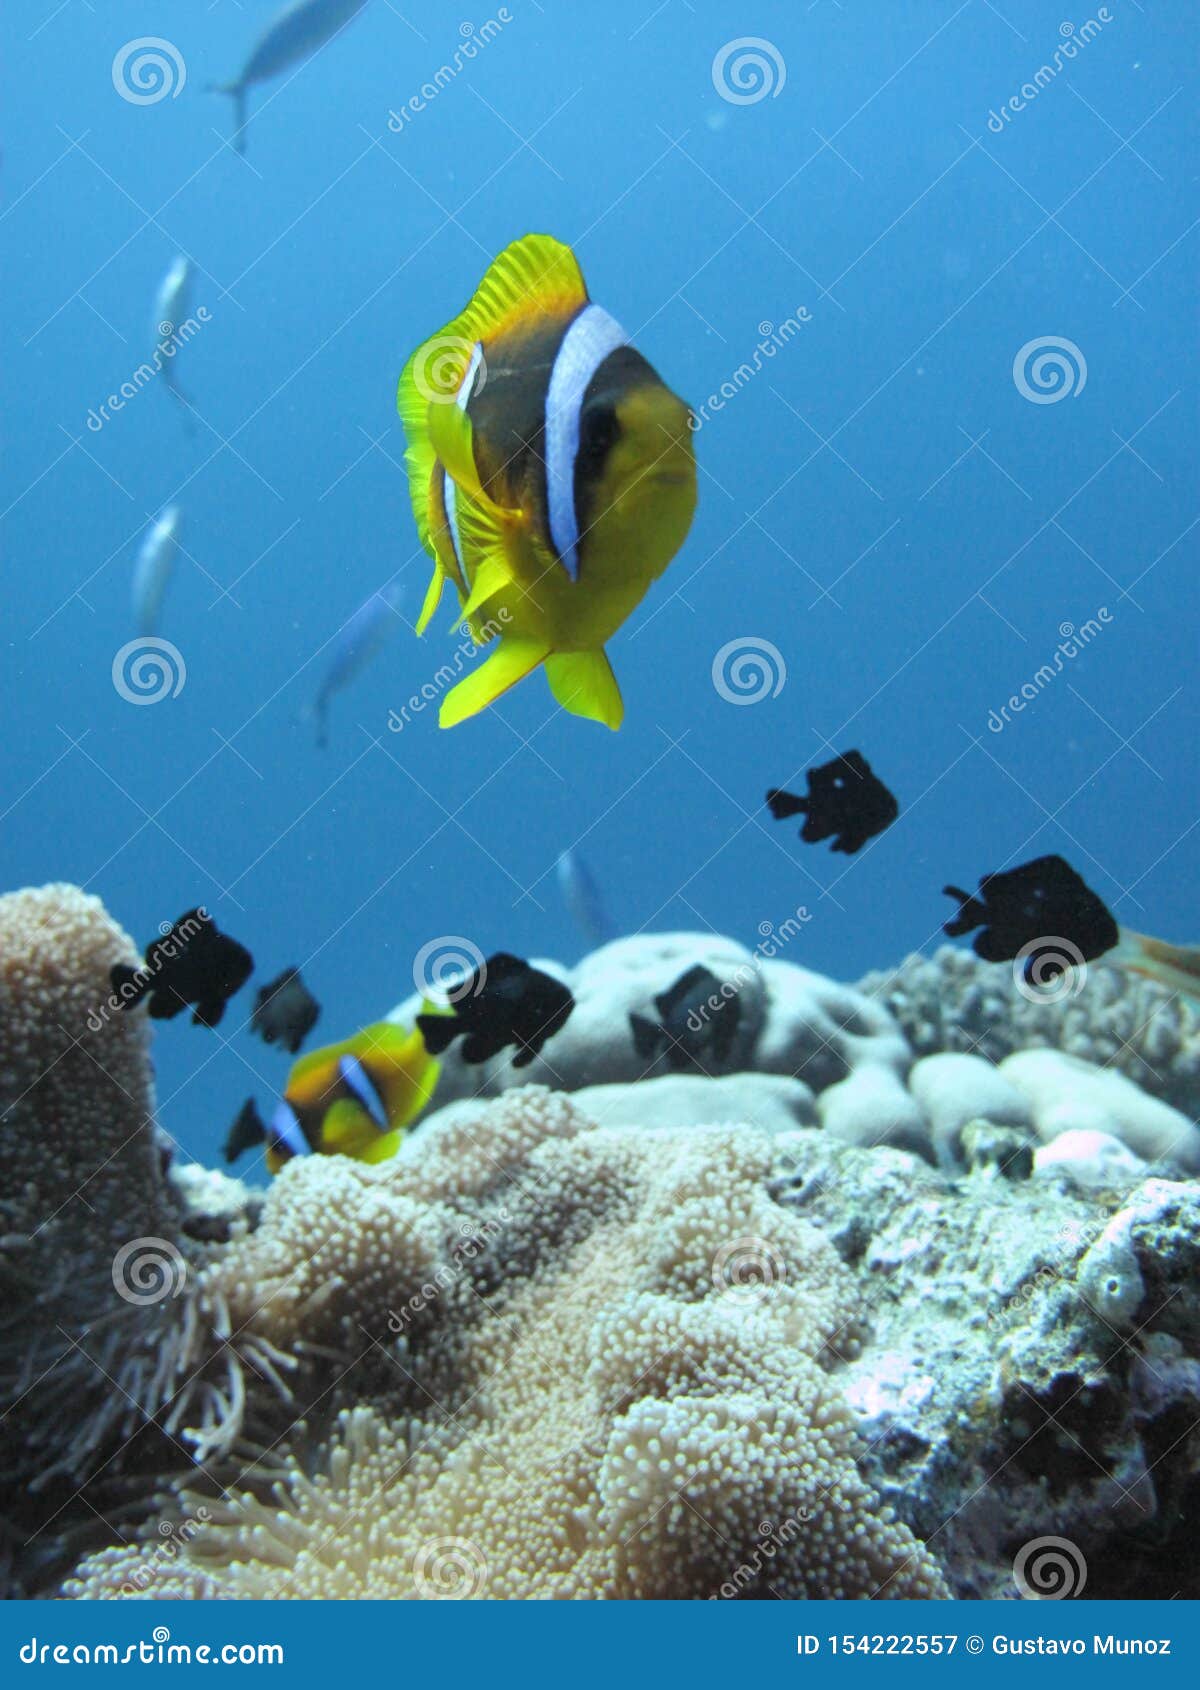 the clownfish amphiprioninae also called anemonefish, next to an sea anemone, in the red sea off the coast of yanbu, in saudi